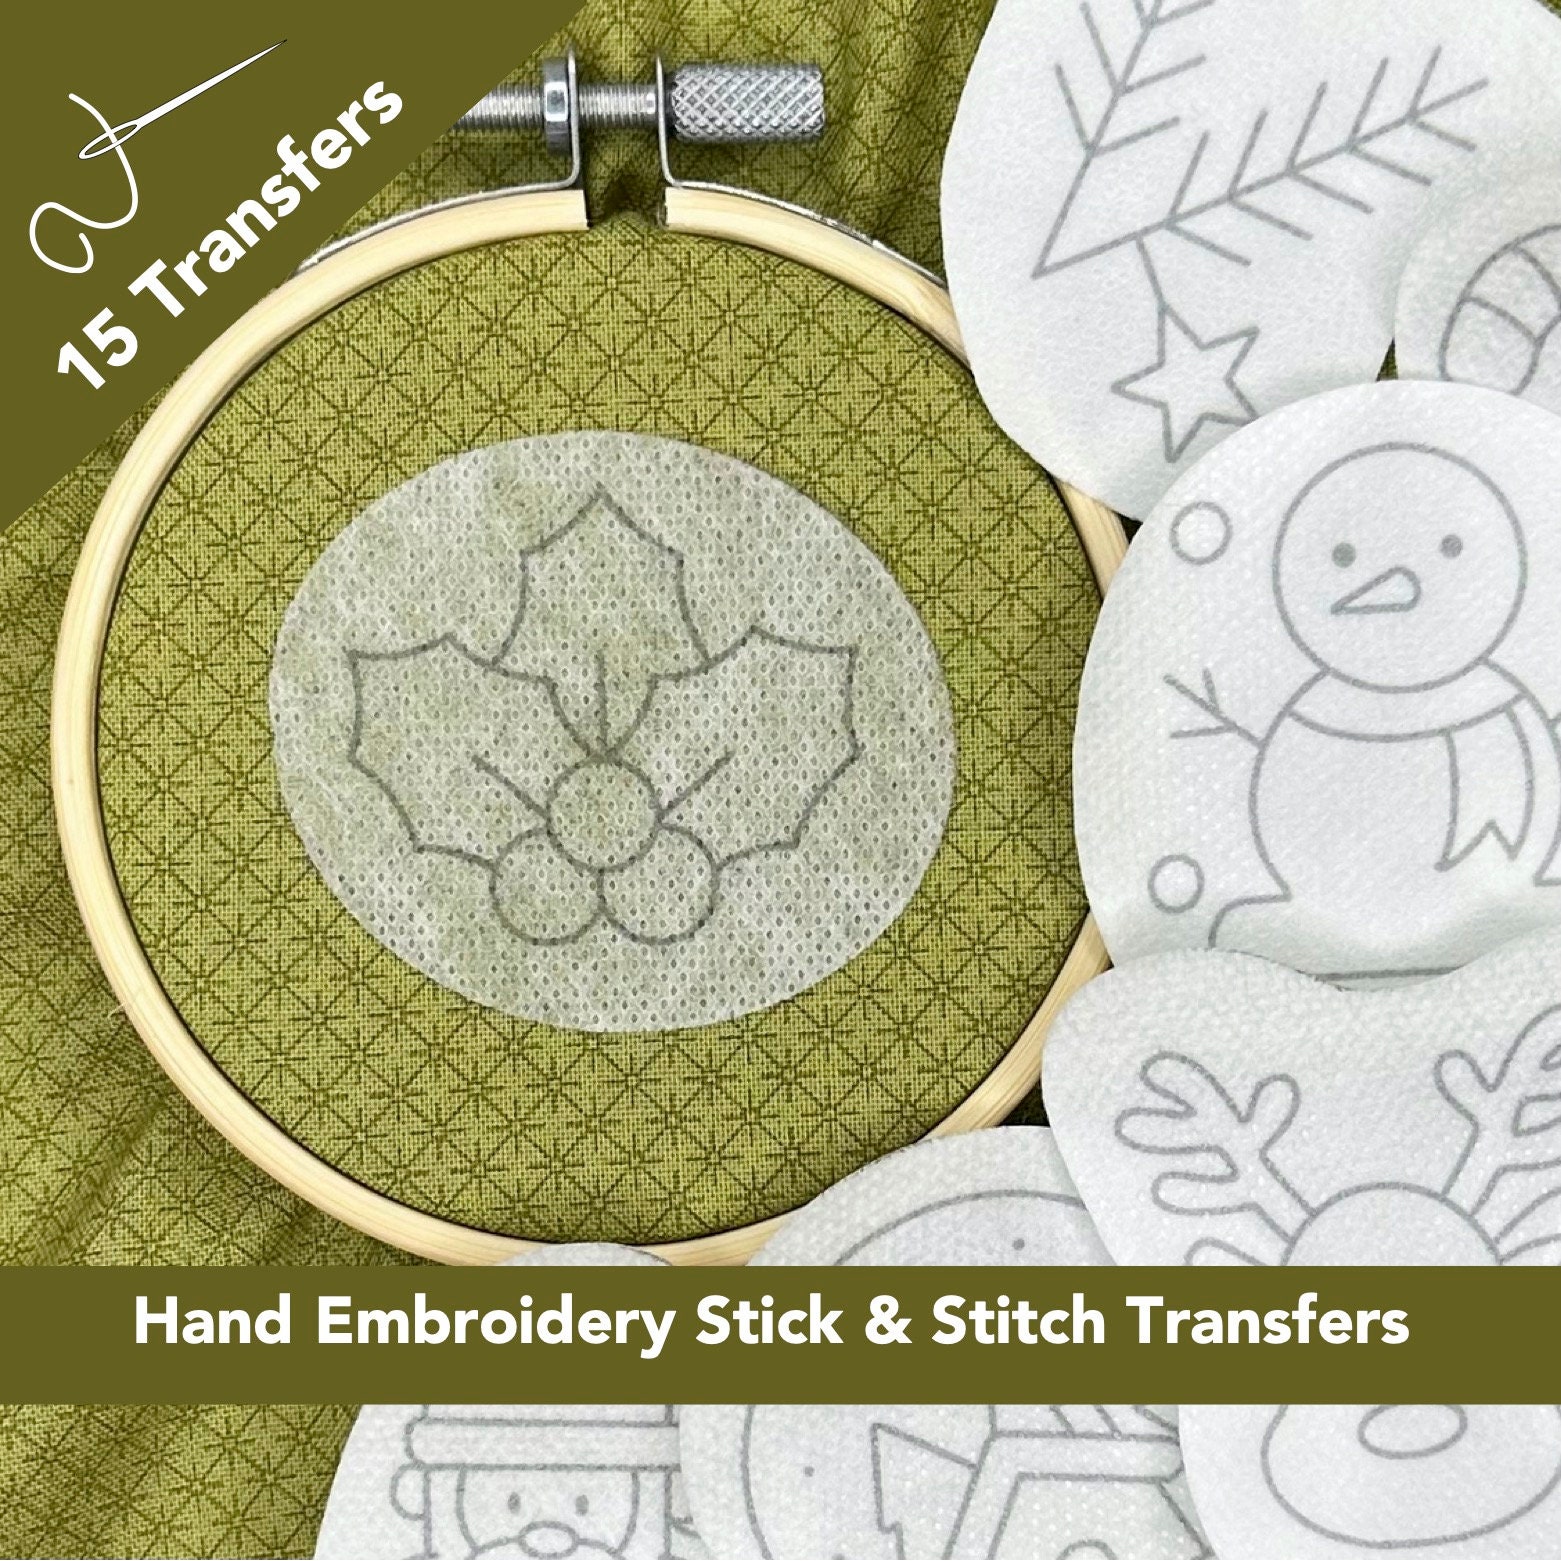  75 Pcs Water Soluble Embroidery Stabilizers, Stick and Stitch  Embroidery Paper Self Adhesive Wash Away Stabilizer for Hand Sewing Lover  Beginners, Hand Sewing Stabilizers for Bags, Shirts, Hats